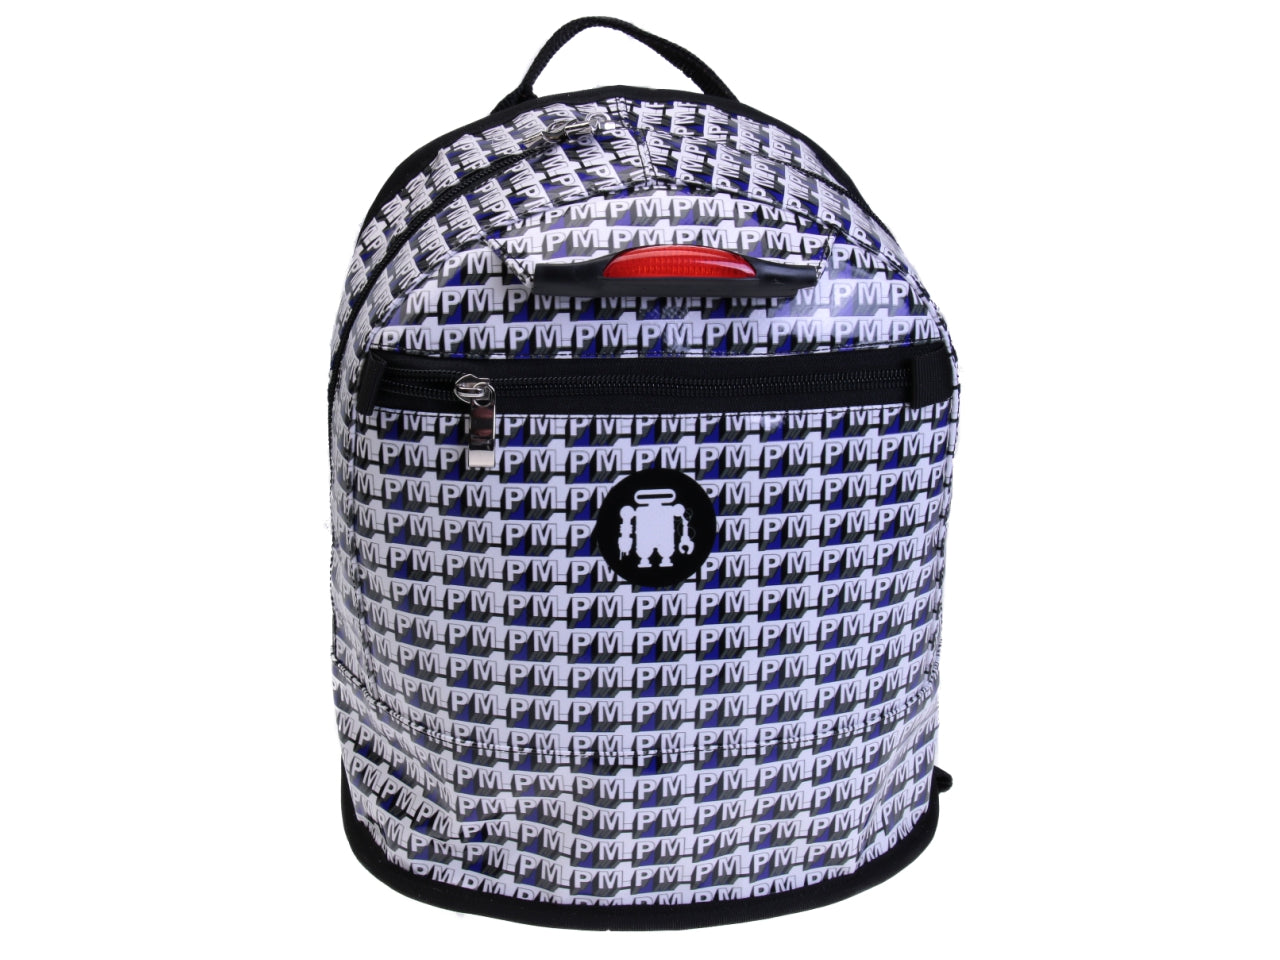 BACKPACK WHITE, GREY AND ROYAL COLOURS. MODEL SUPERINO MADE OF LORRY TARPAULIN. - Limited Edition Paul Meccanico